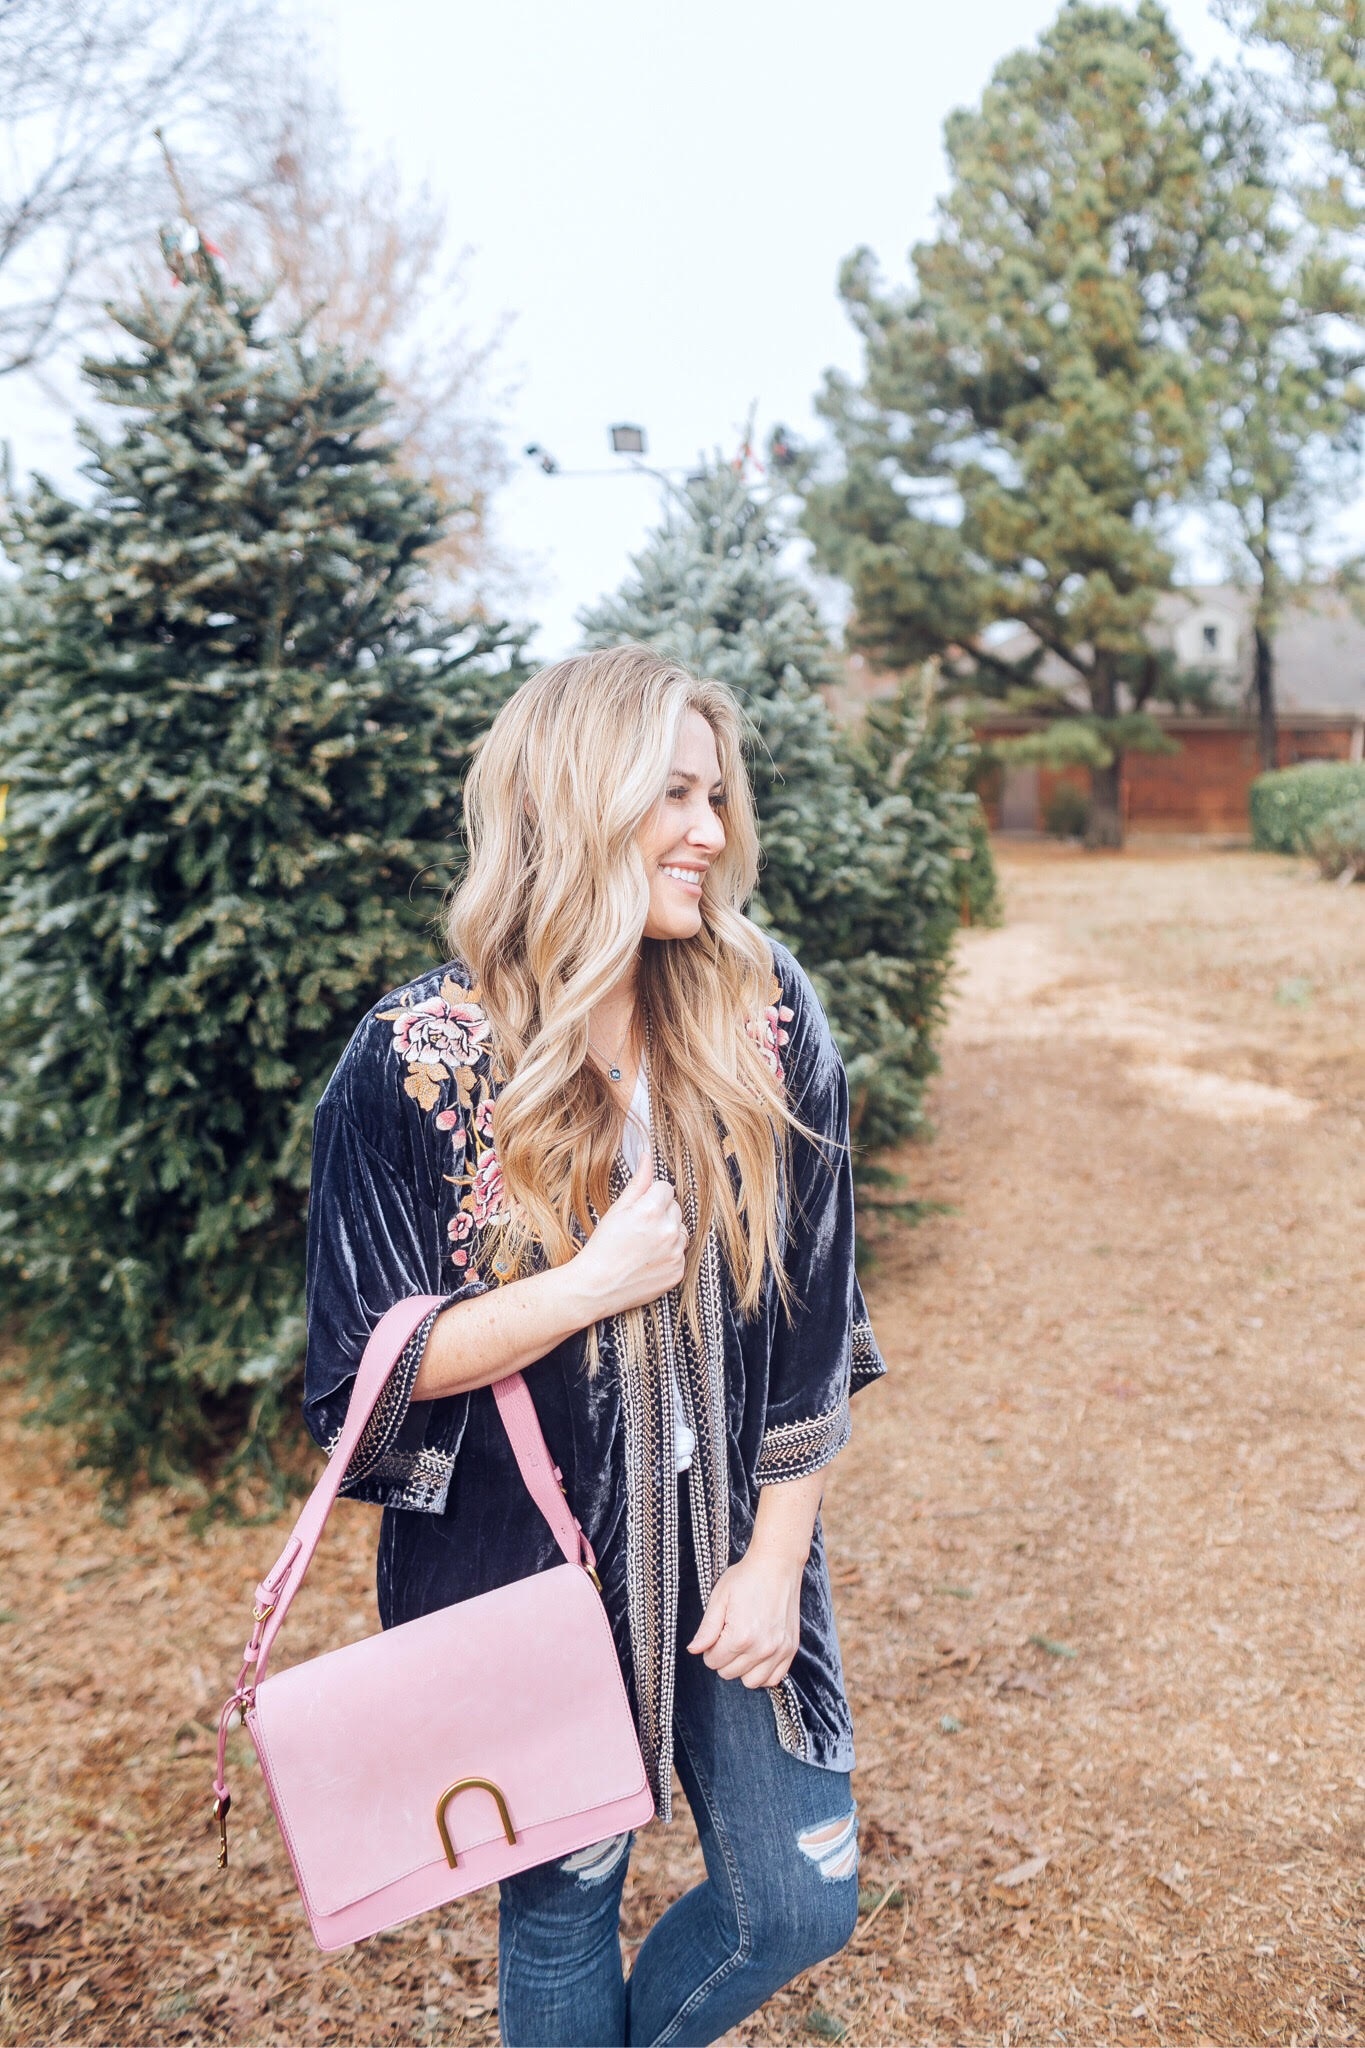 5 Cute Velvet Kimonos to Wear This Winter featured by top US fashion blog, Walking in Memphis in High Heels: image of a woman wearing a LOFT velvet kimono